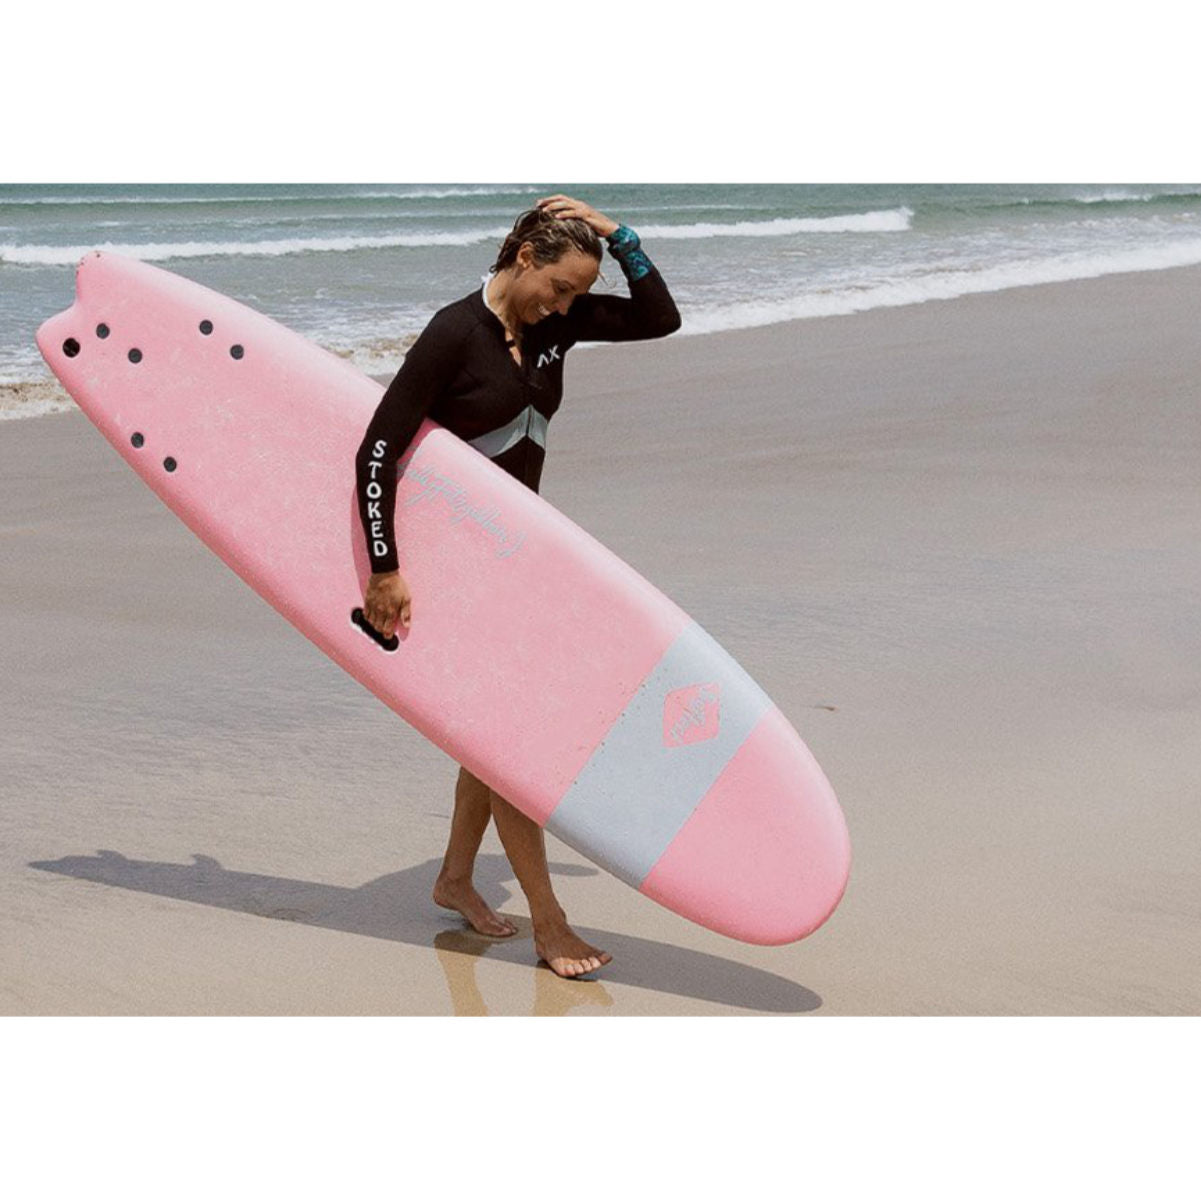 
                  
                    Softech Sally Fitzgibbons FB 6'0 Pink FCS
                  
                